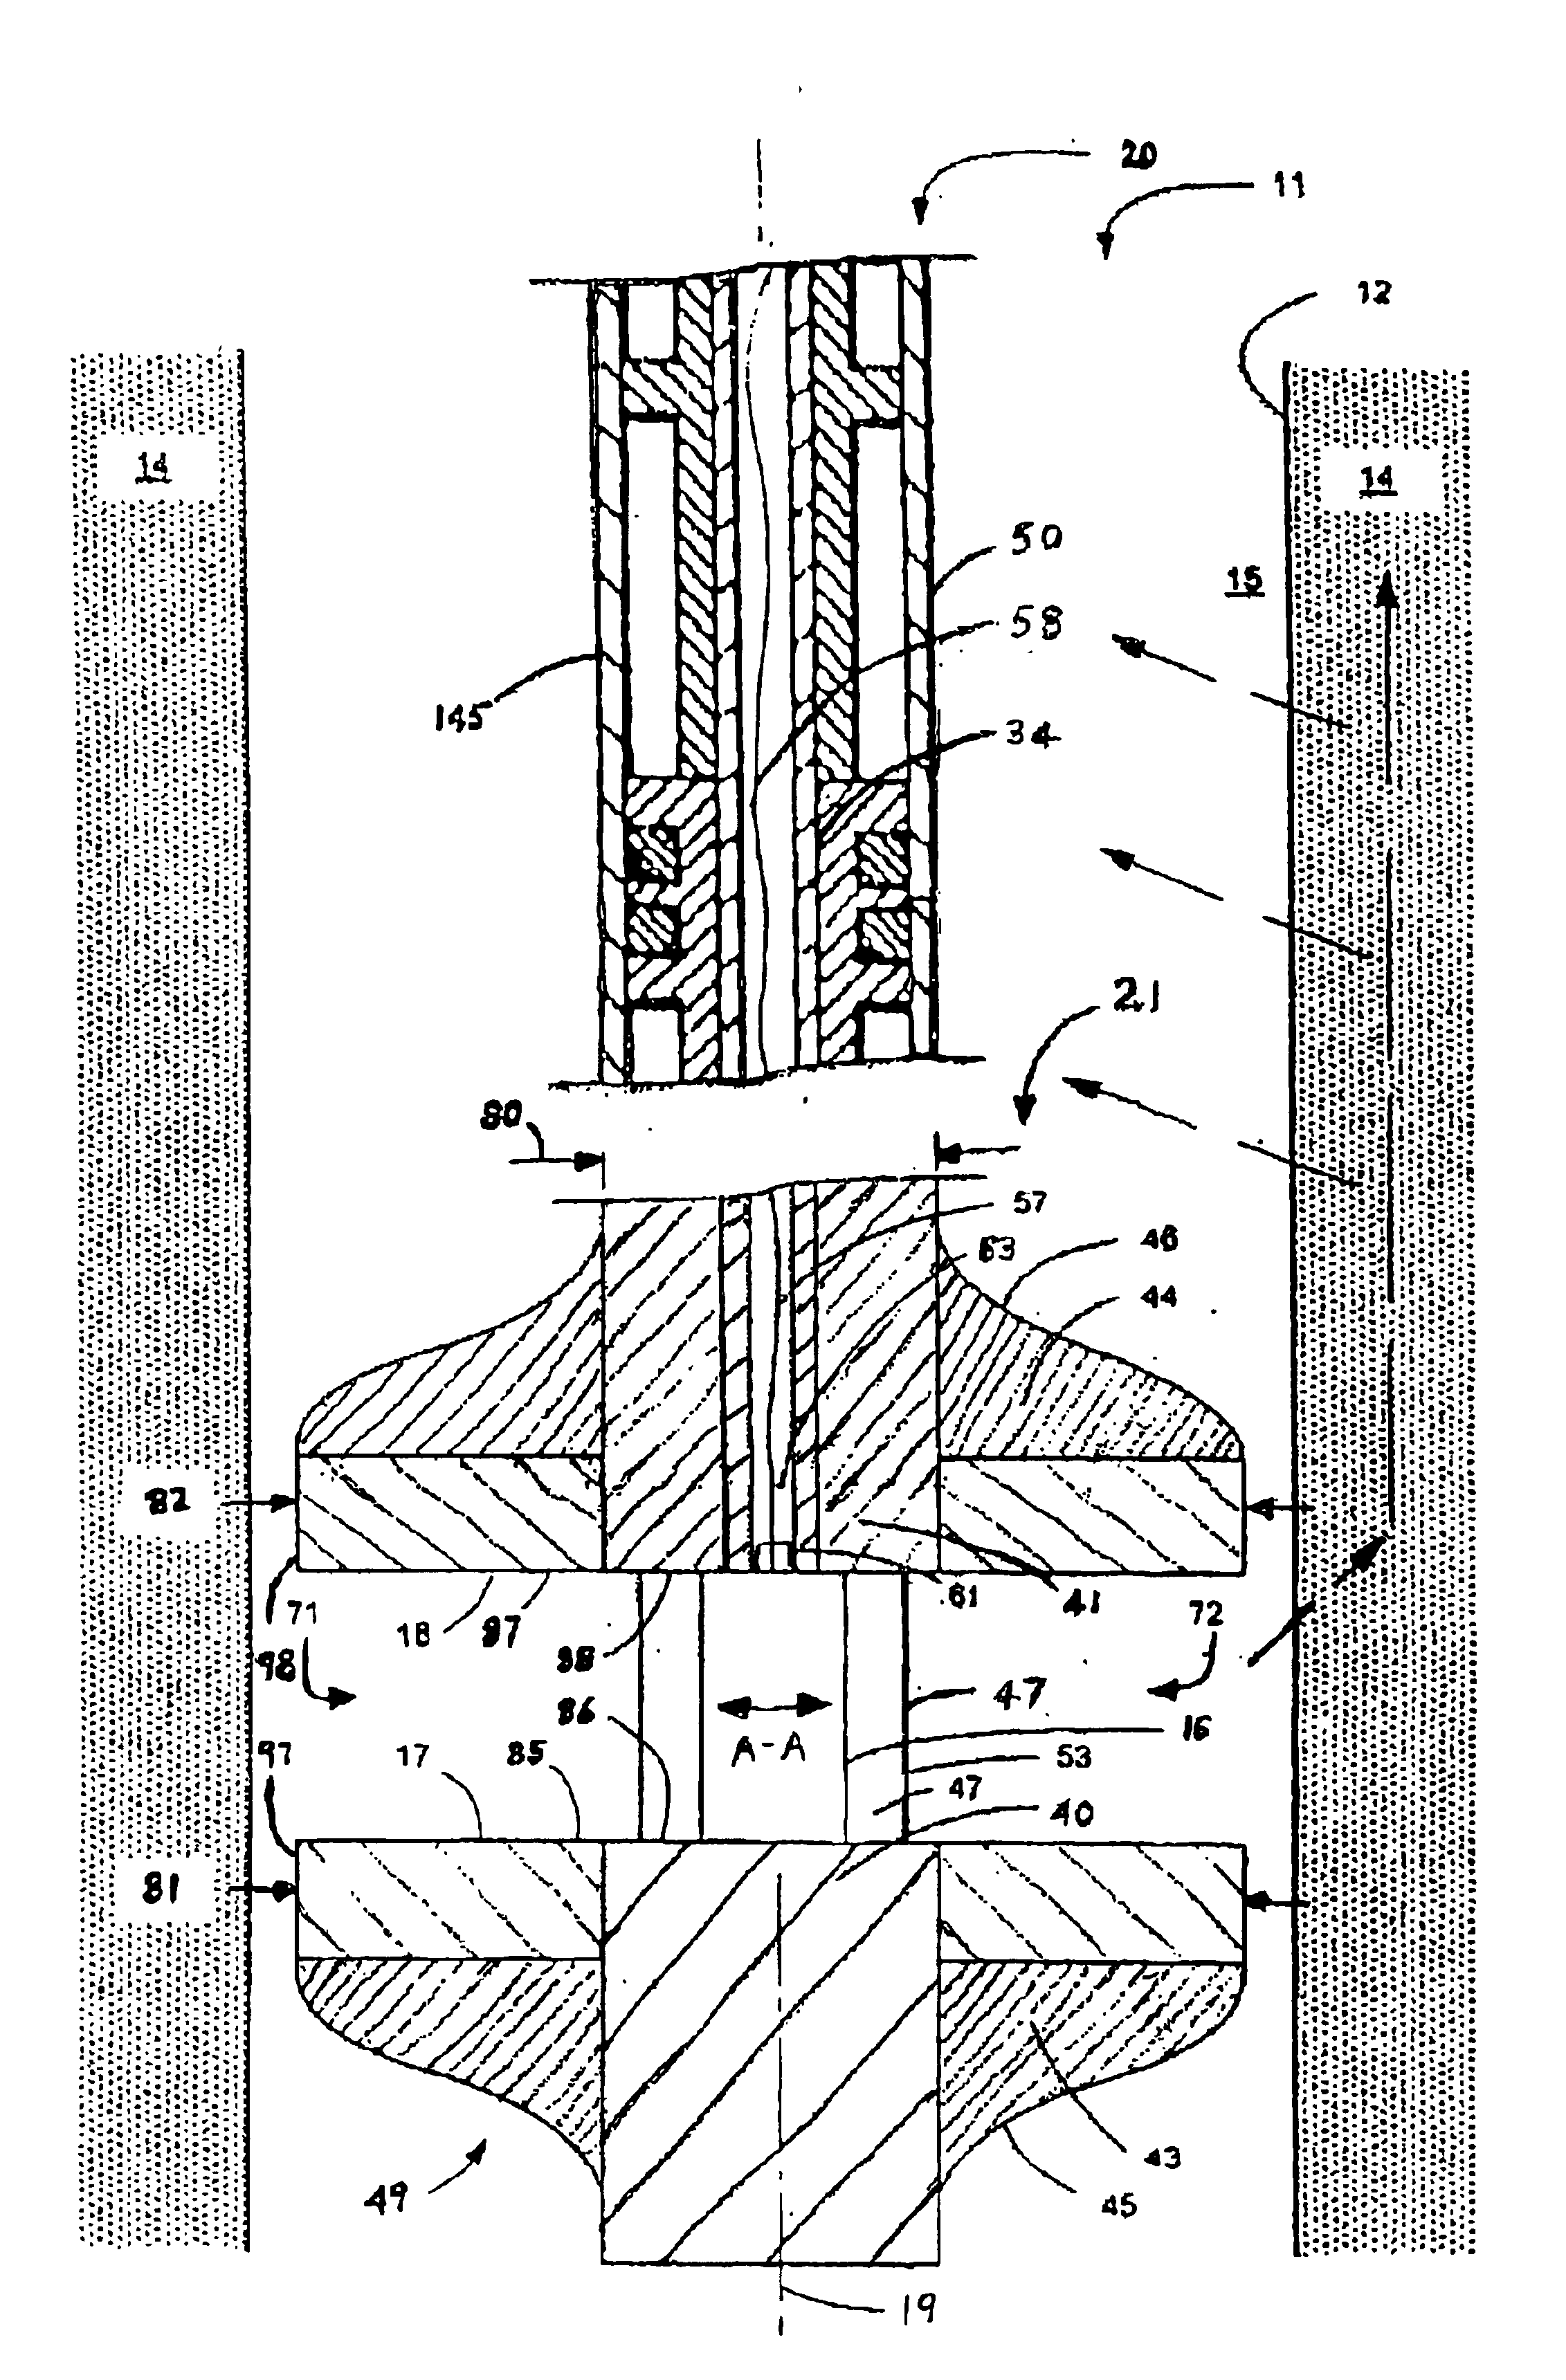 Oil well acoustic logging tool with baffles forming an acoustic waveguide